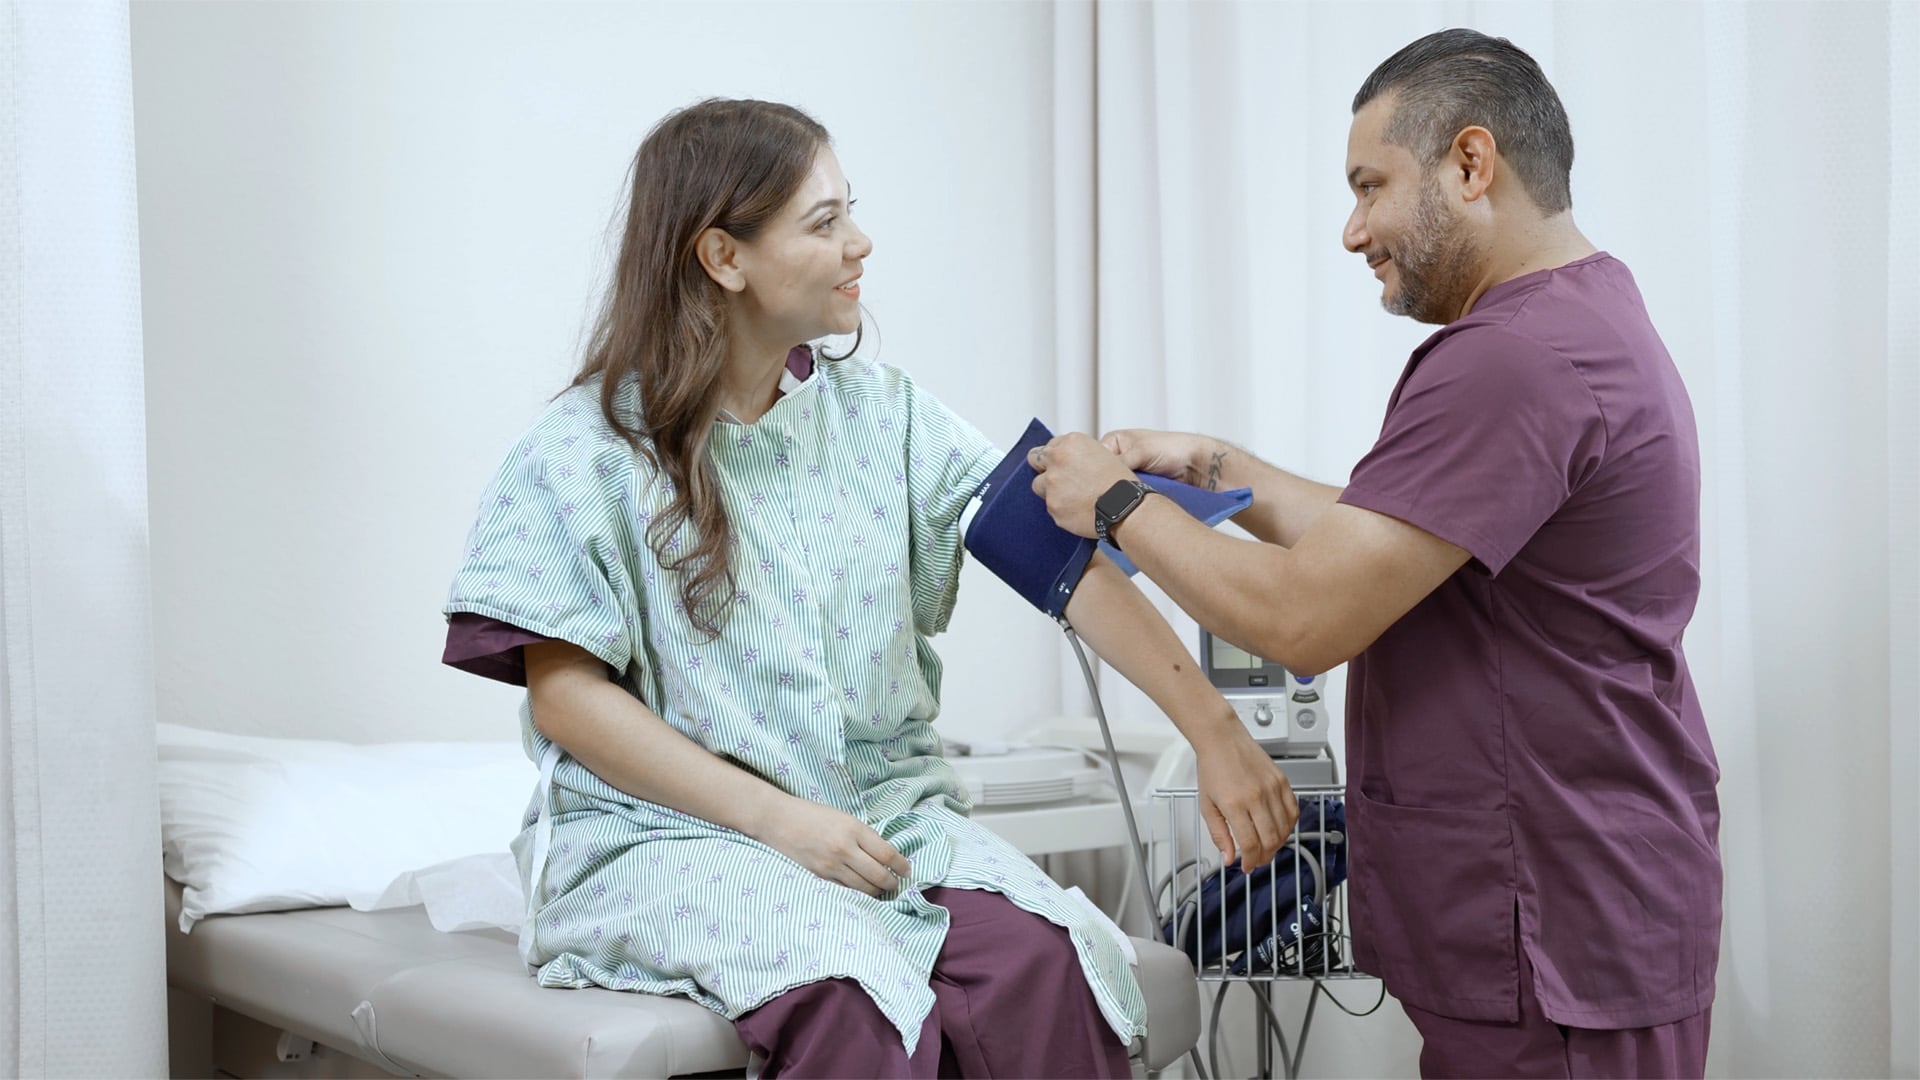 Medical assisting student placing blood pressure cuff on partner's arm